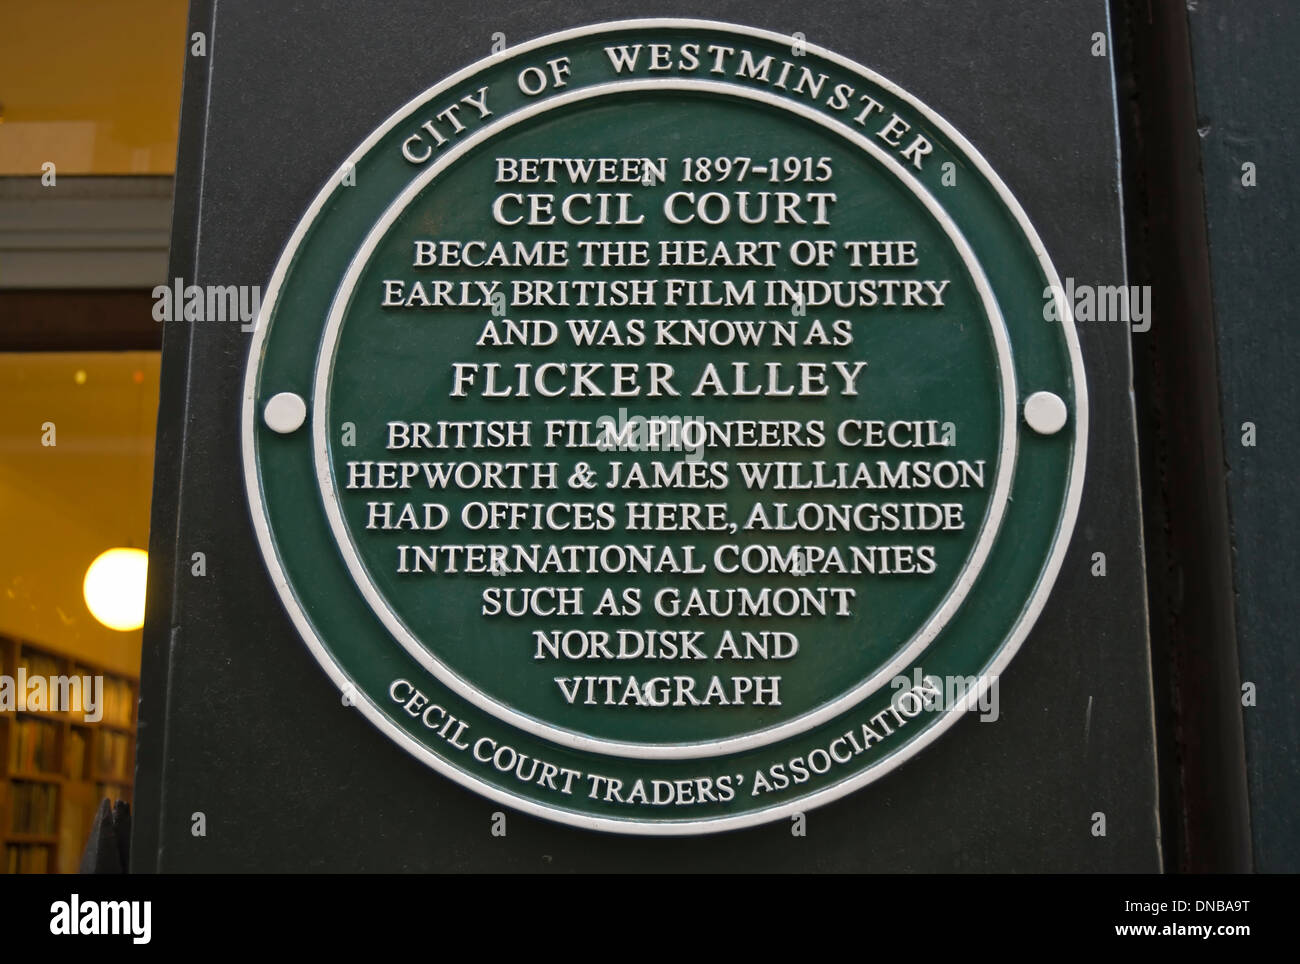 westminster council green plaque marking flicker alley, a nickname of cecil court when home to the early british film industry Stock Photo